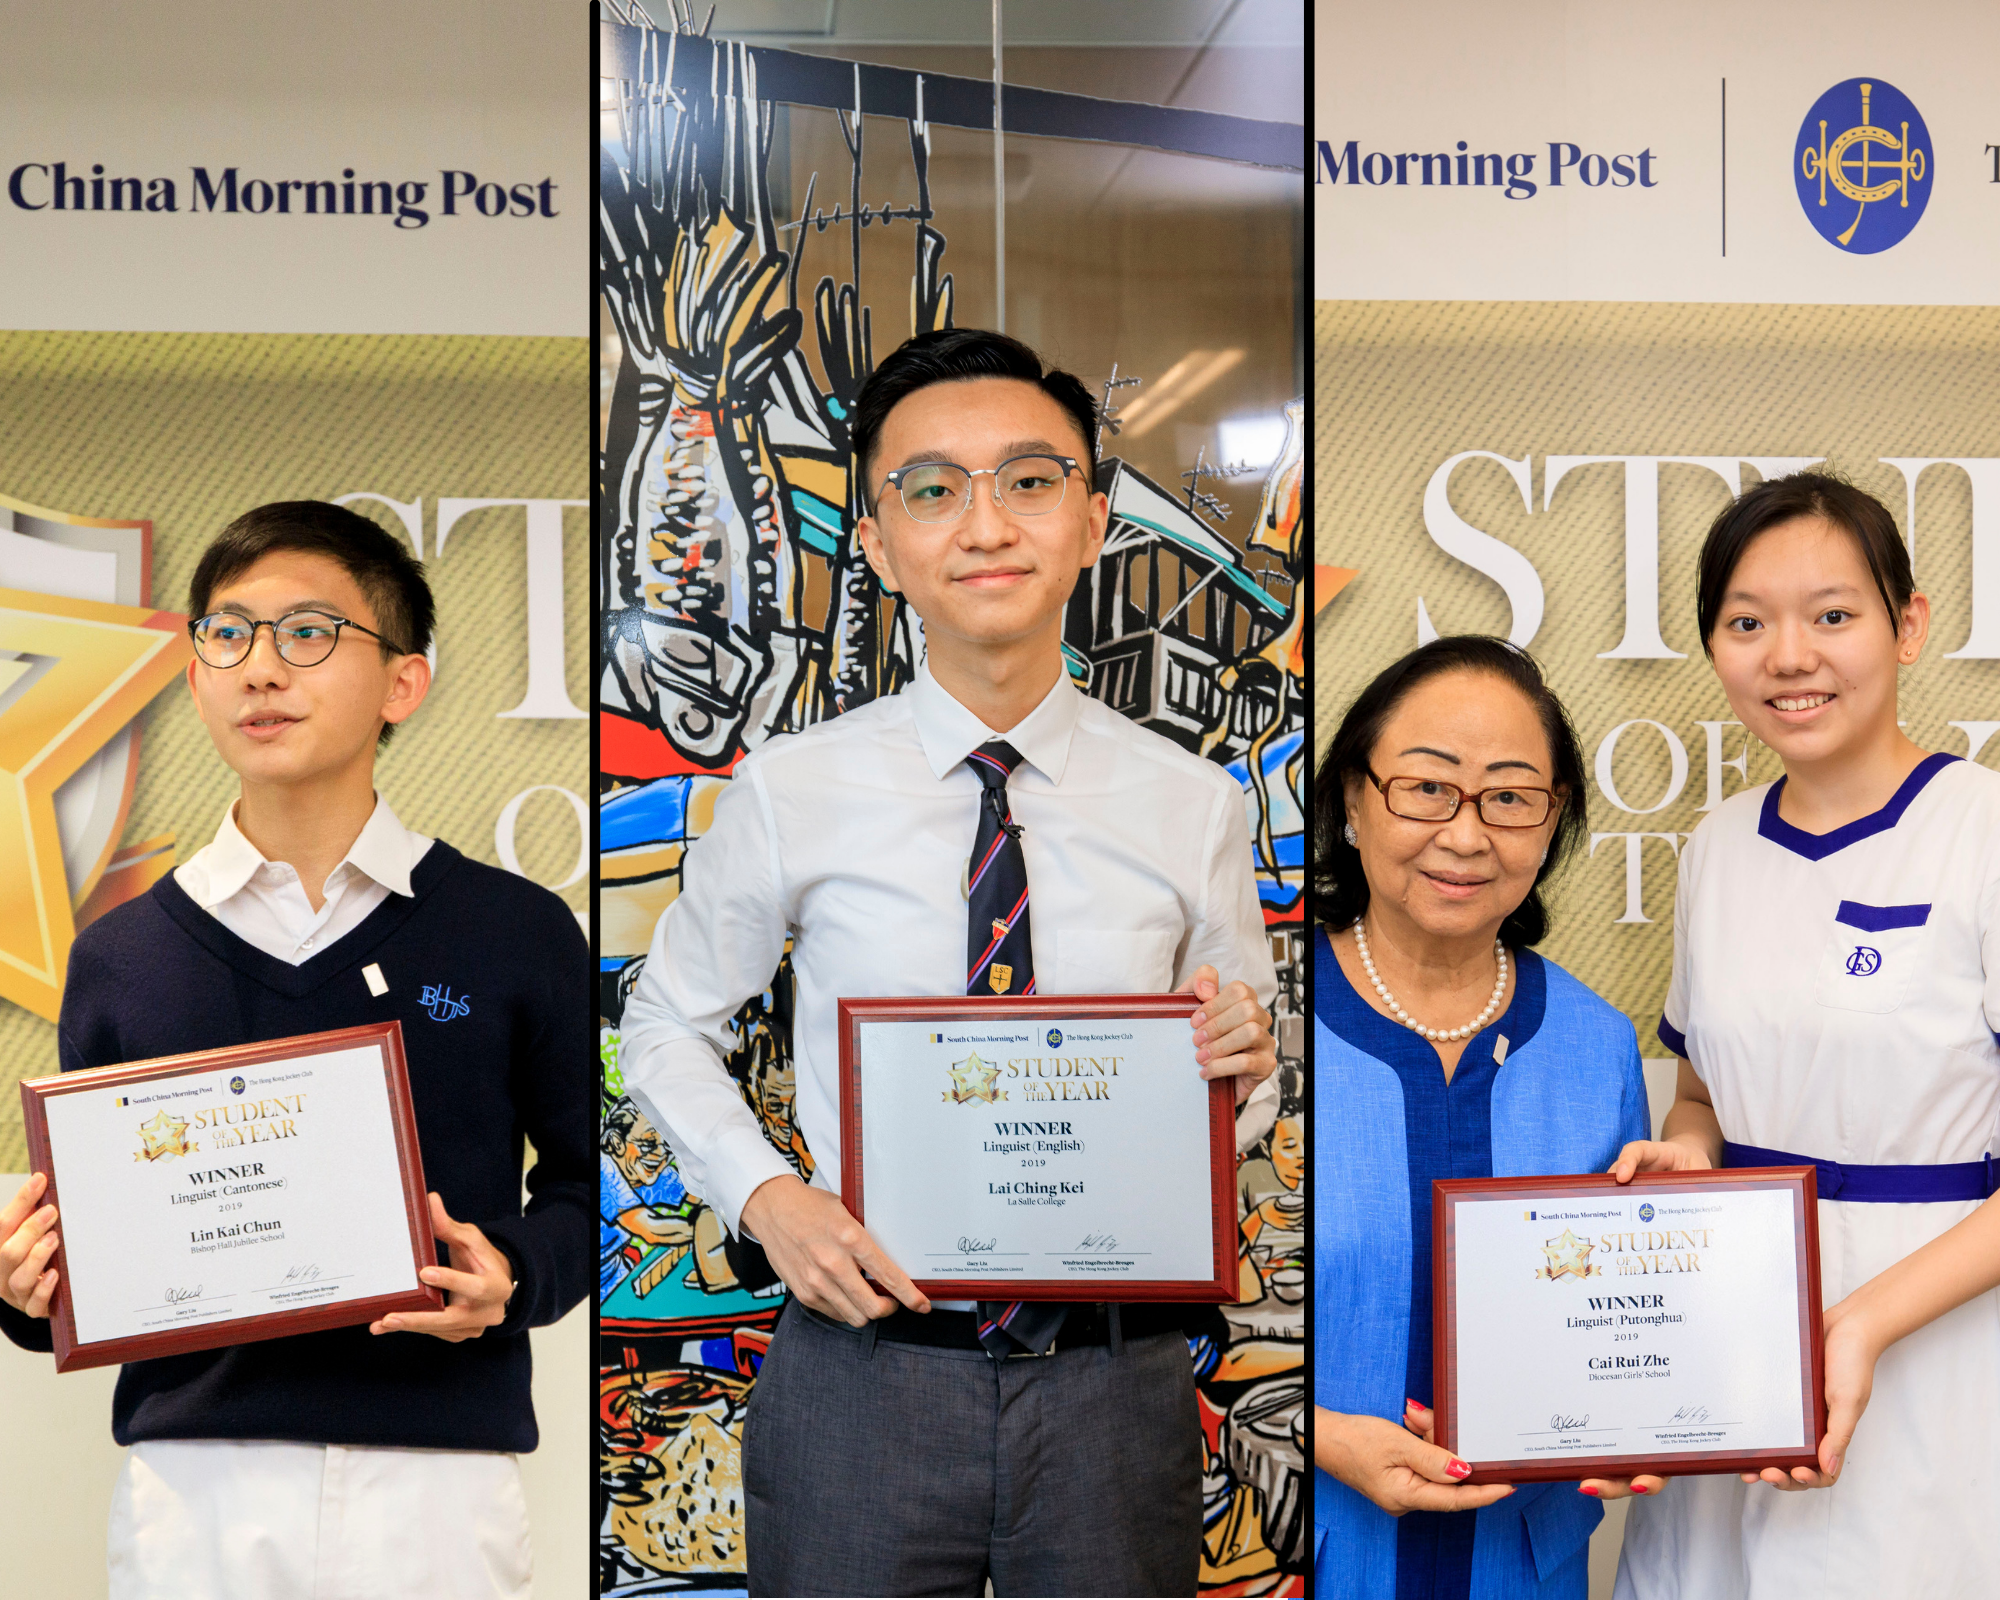 Student of the Year, Linguist award winners Charlie Lin Kai-chun from Bishop Hall Jubilee School (Cantonese); Oliver Lai Ching-kai from La Salle College (English); and Rachael Cai Ruizhe from Diocesan Girls’ School (Putonghua). 